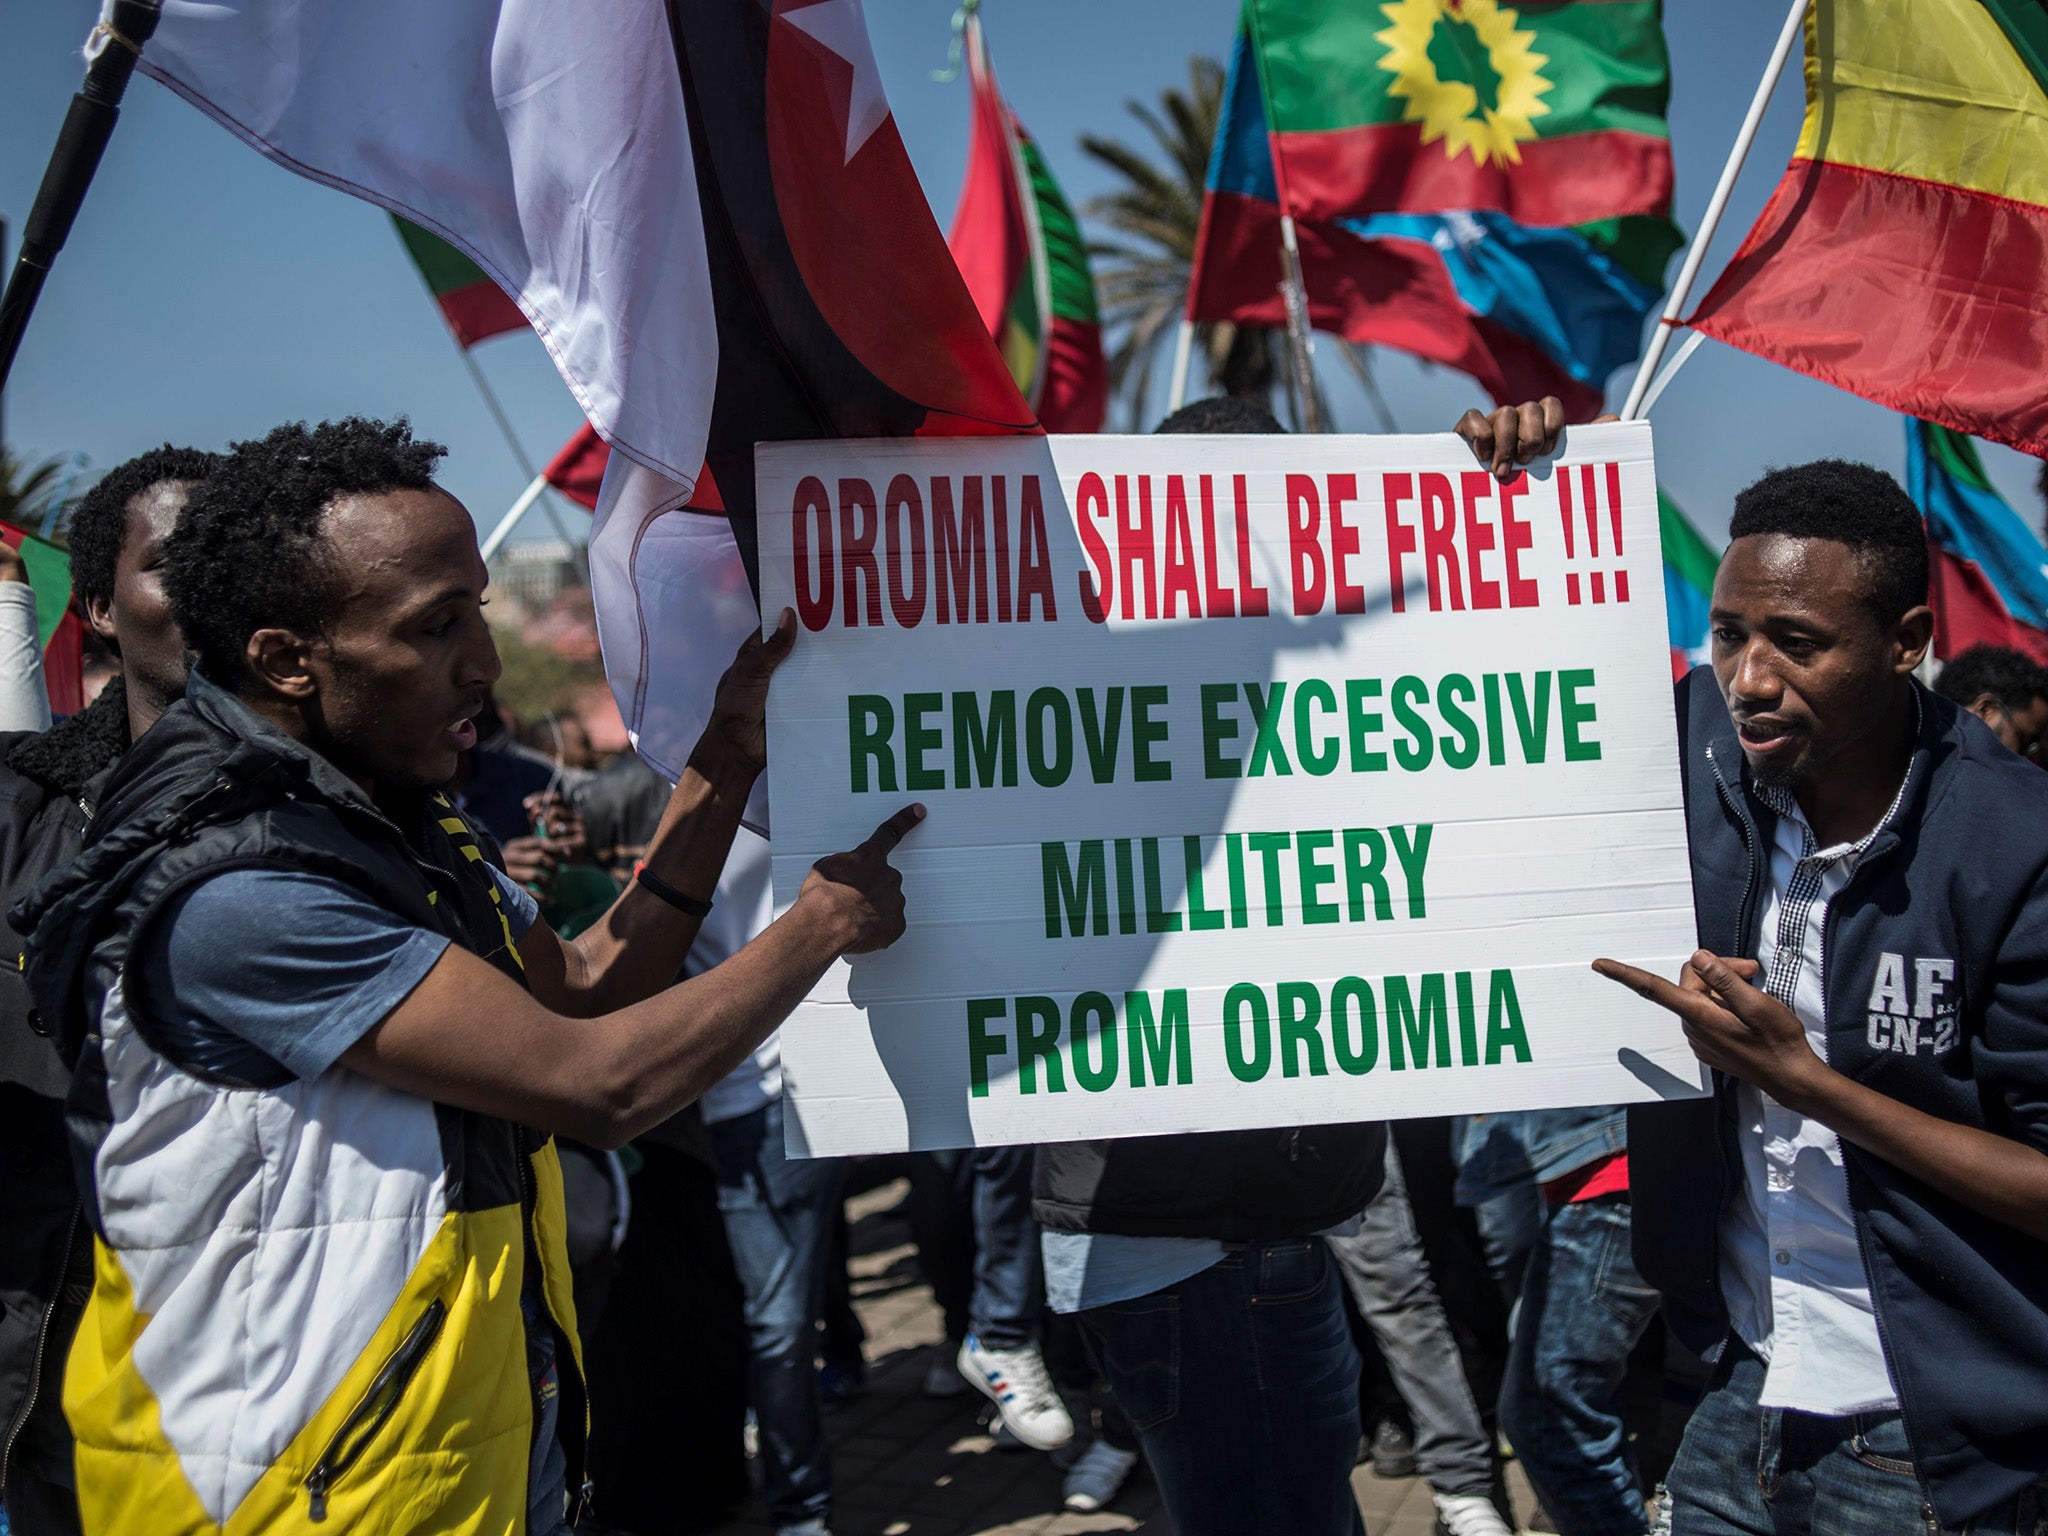 People protesting against the treatment of the Oromo at a demonstration in Johannesburg, South Africa last week